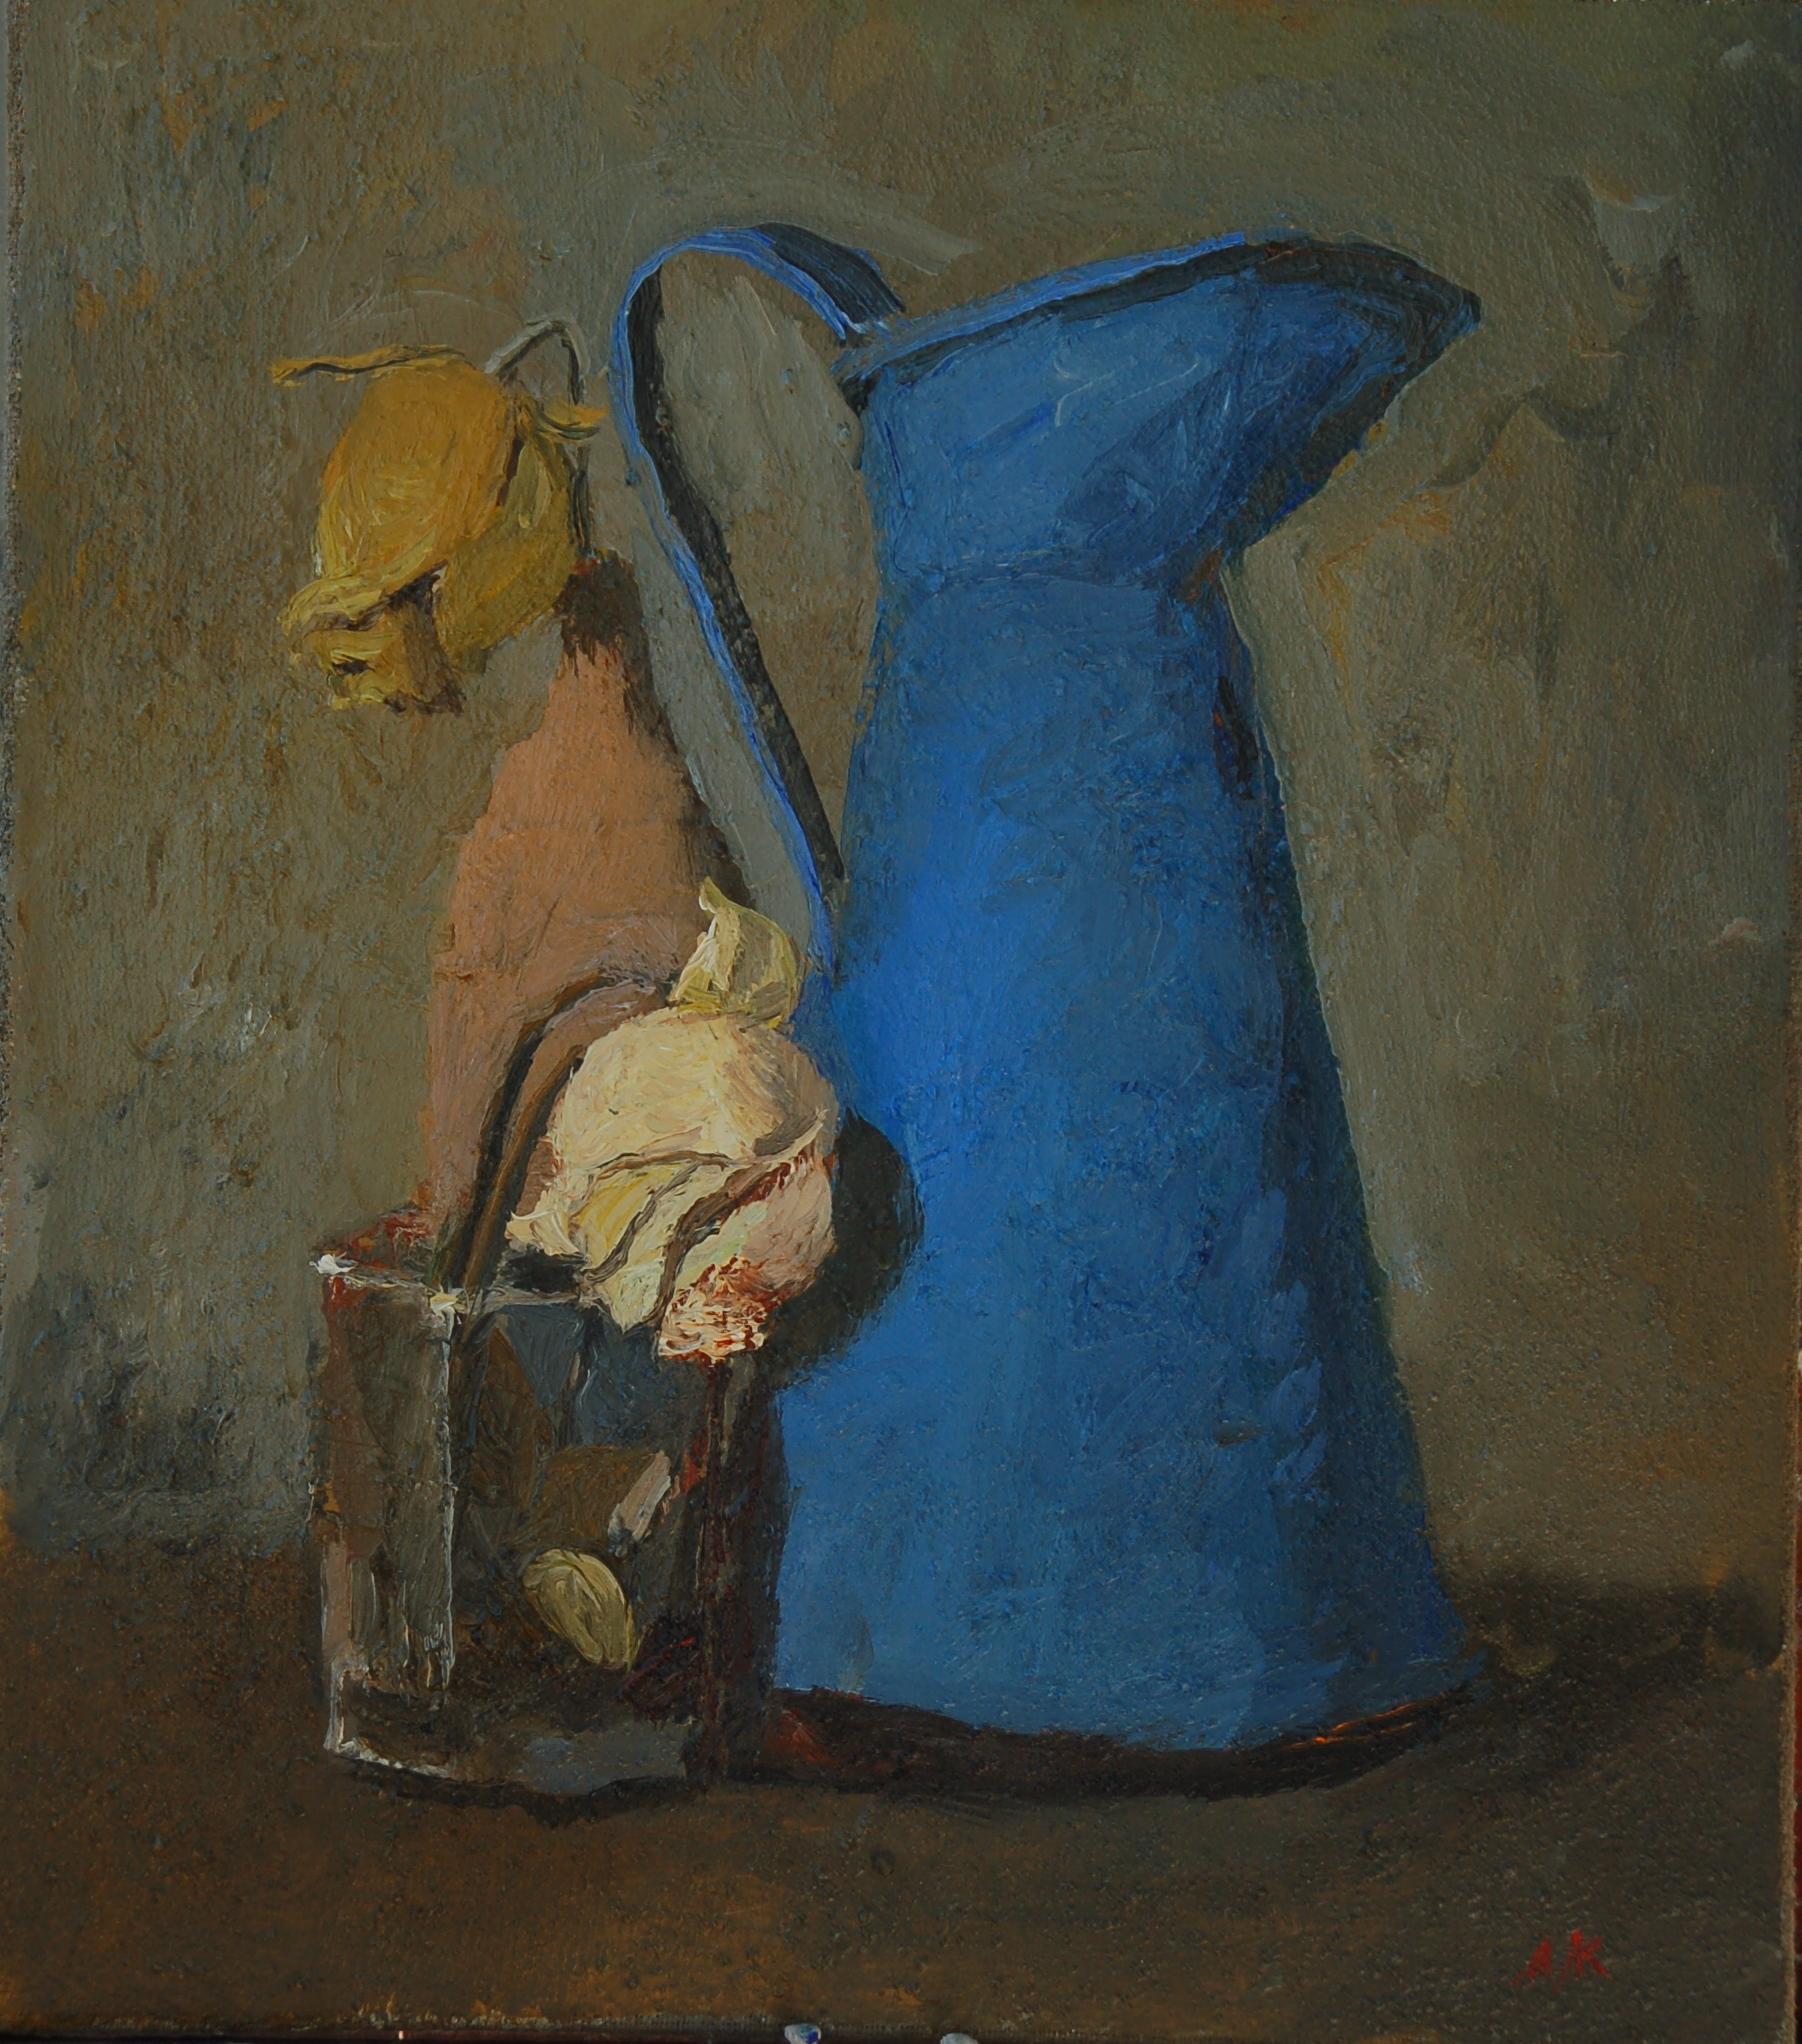 Still life with a blue pitcher